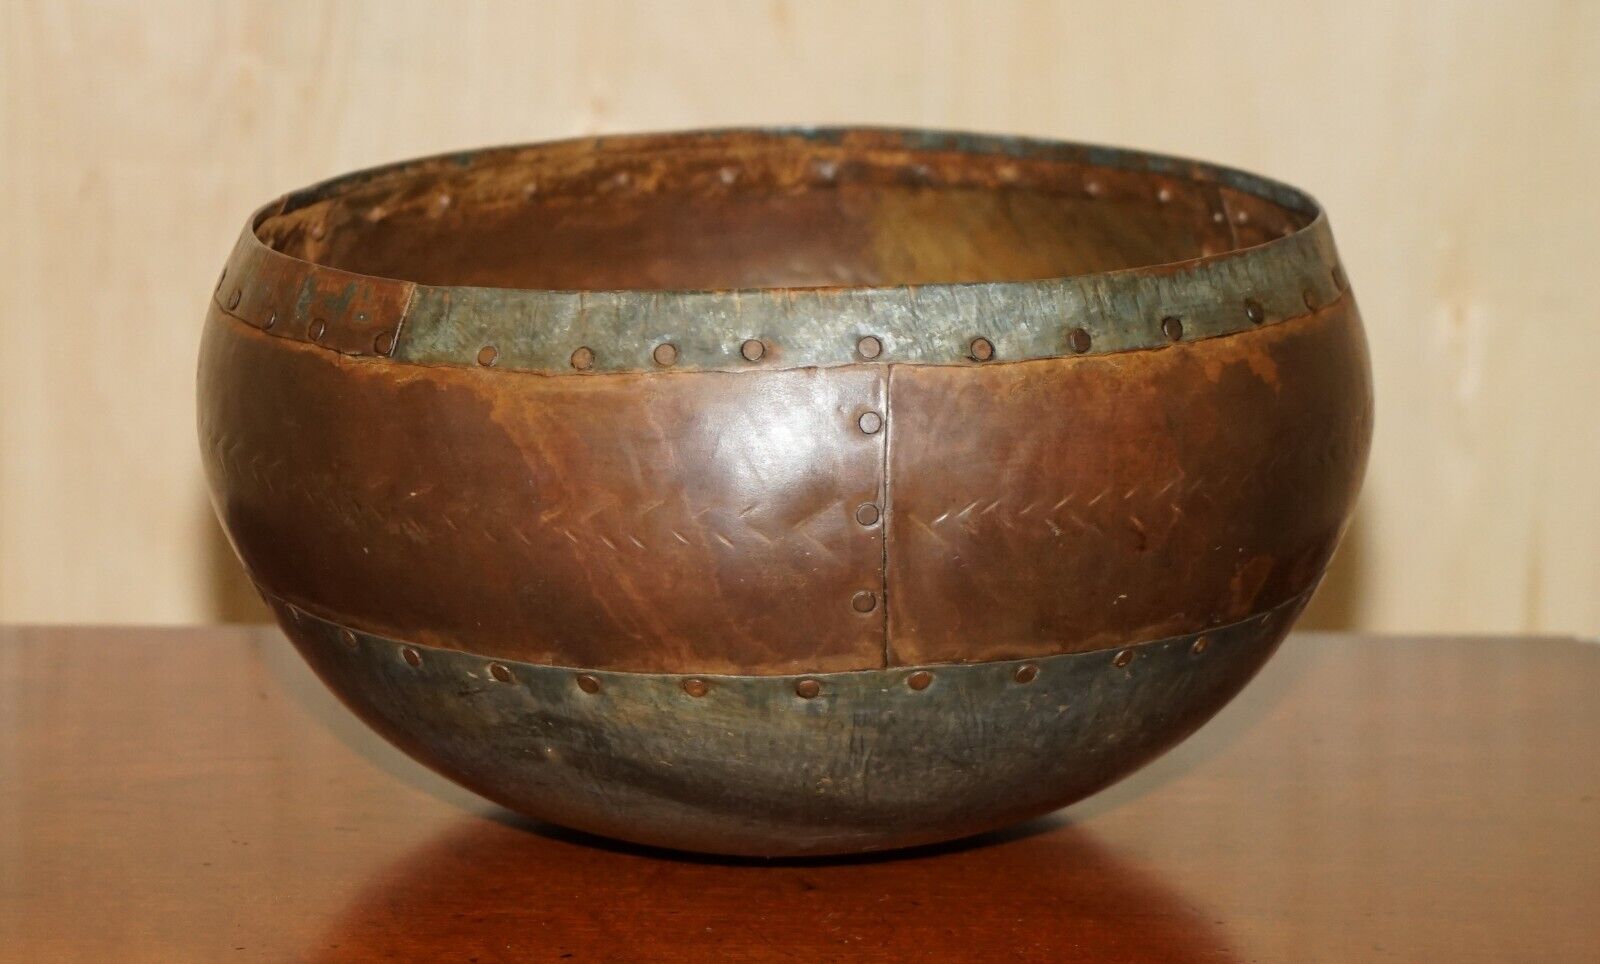 STUNNING ANTIQUE SUPER DECORATIVE HAND HAMMERED BOWL IDEAL FOR FRUIT OR PUNCH